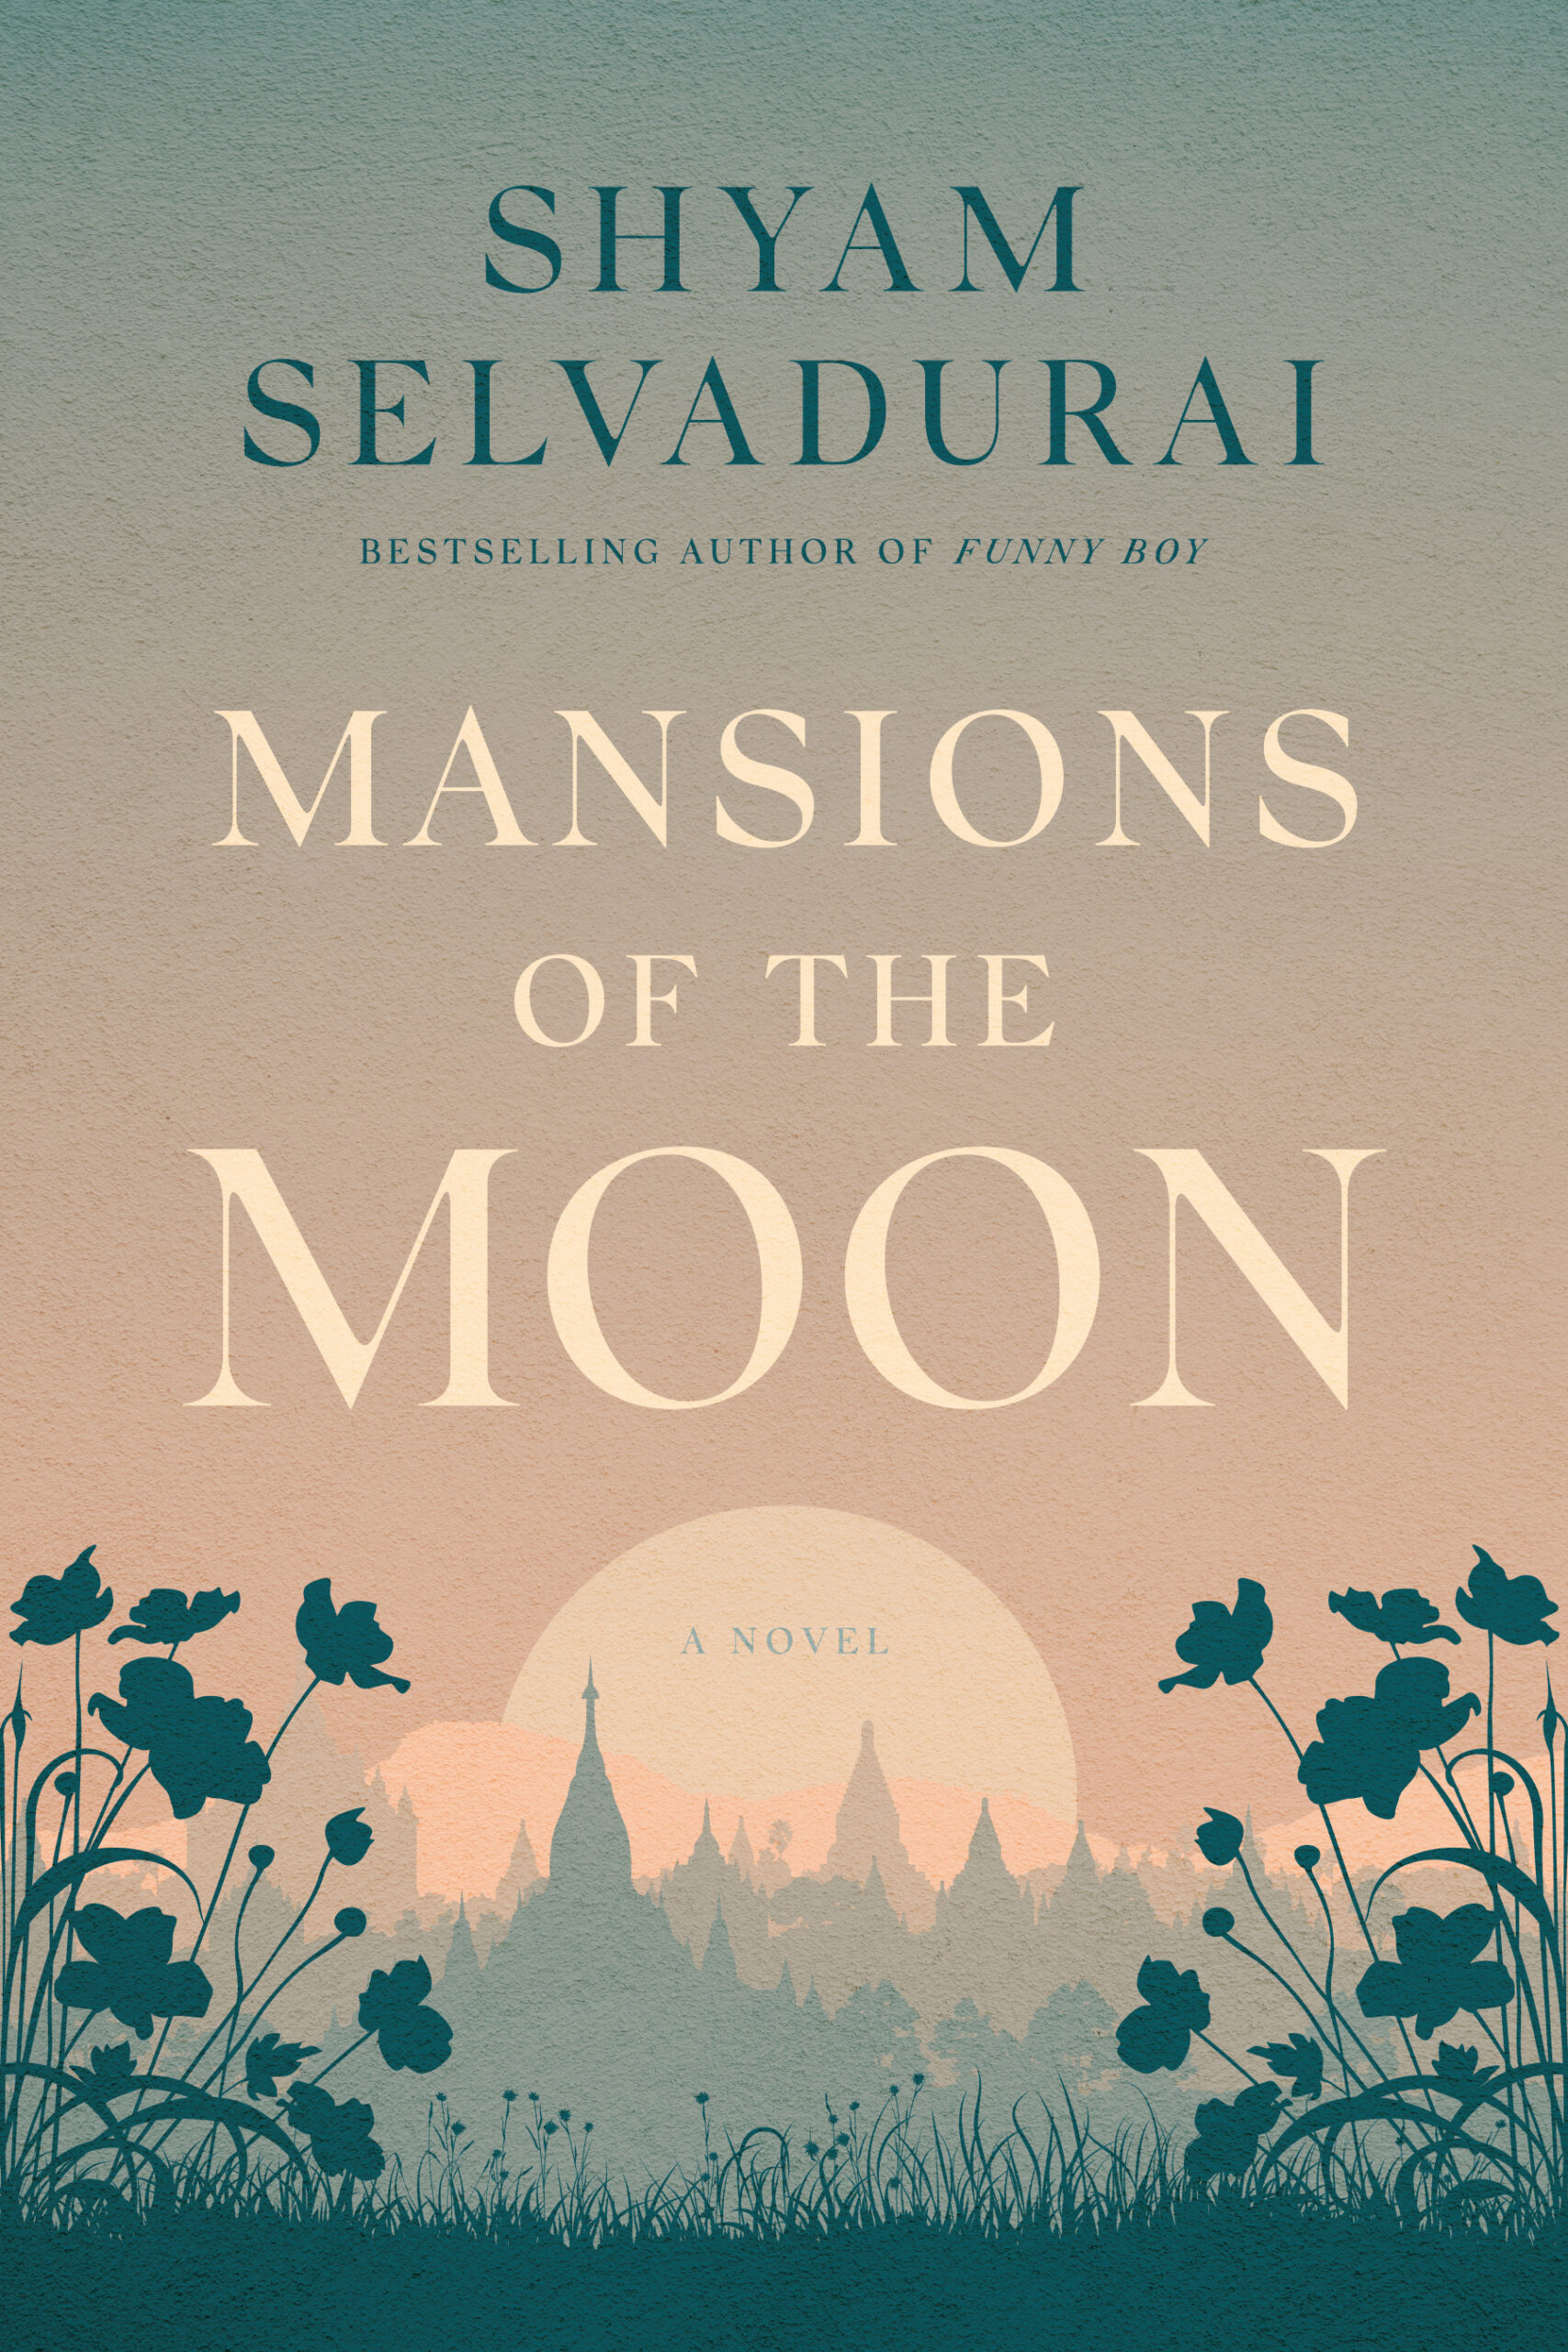 Shyam Selvadurai's Mansions of the Moon book cover